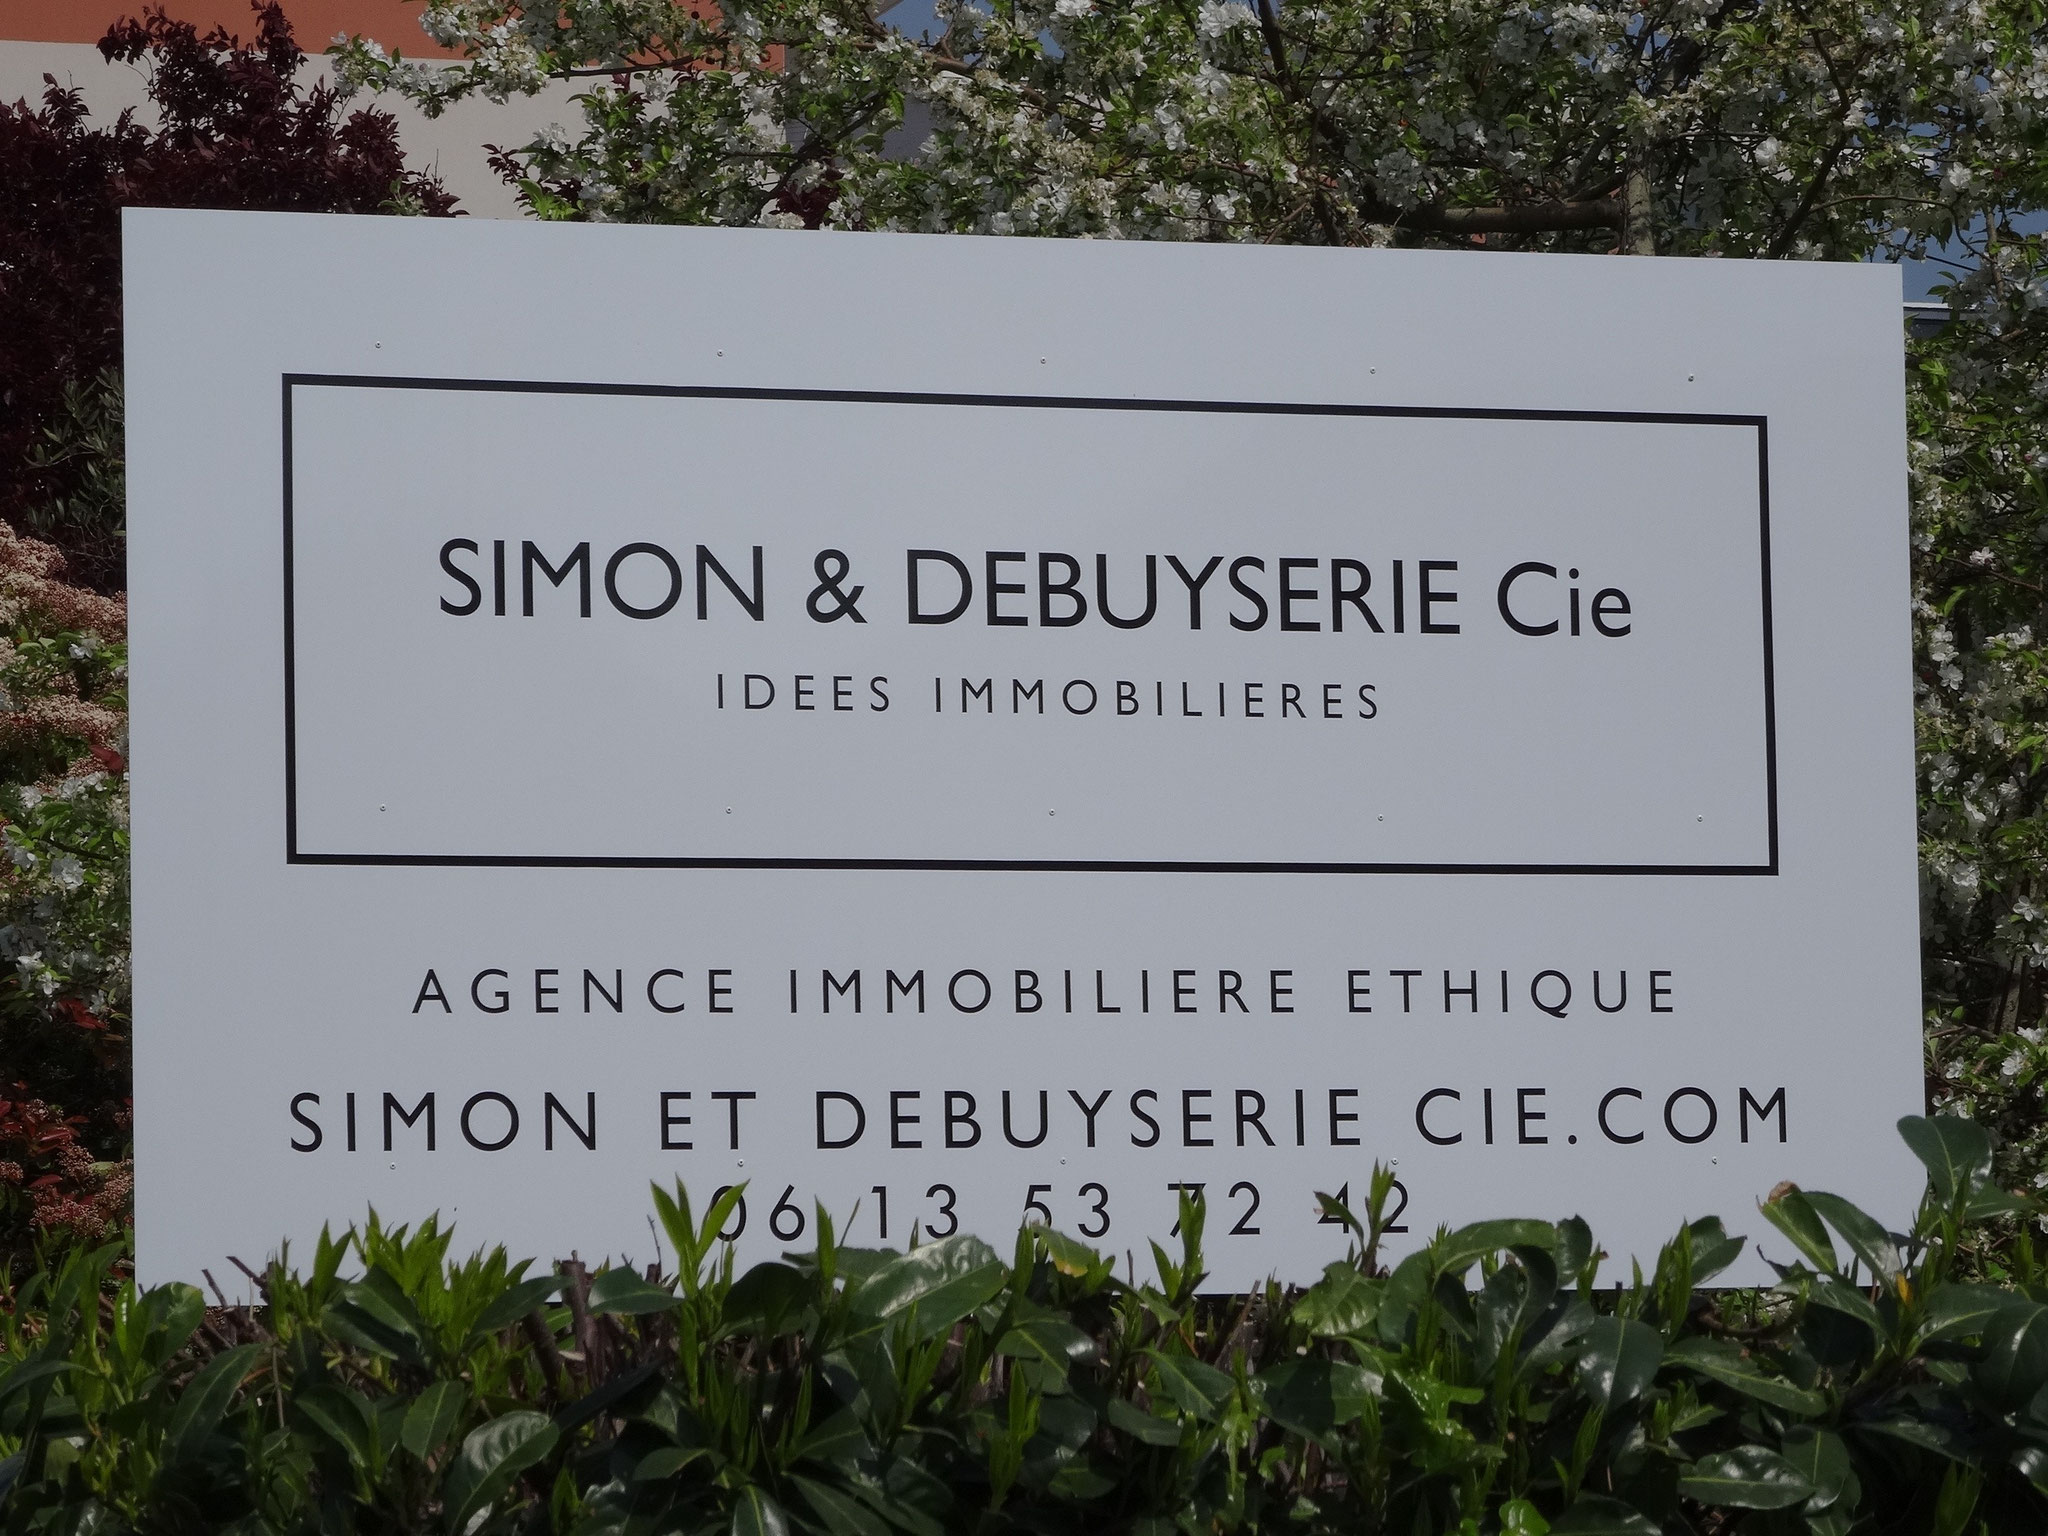 SIMON & DEBUYSERIE Cie : IDEES IMMOBILIERES